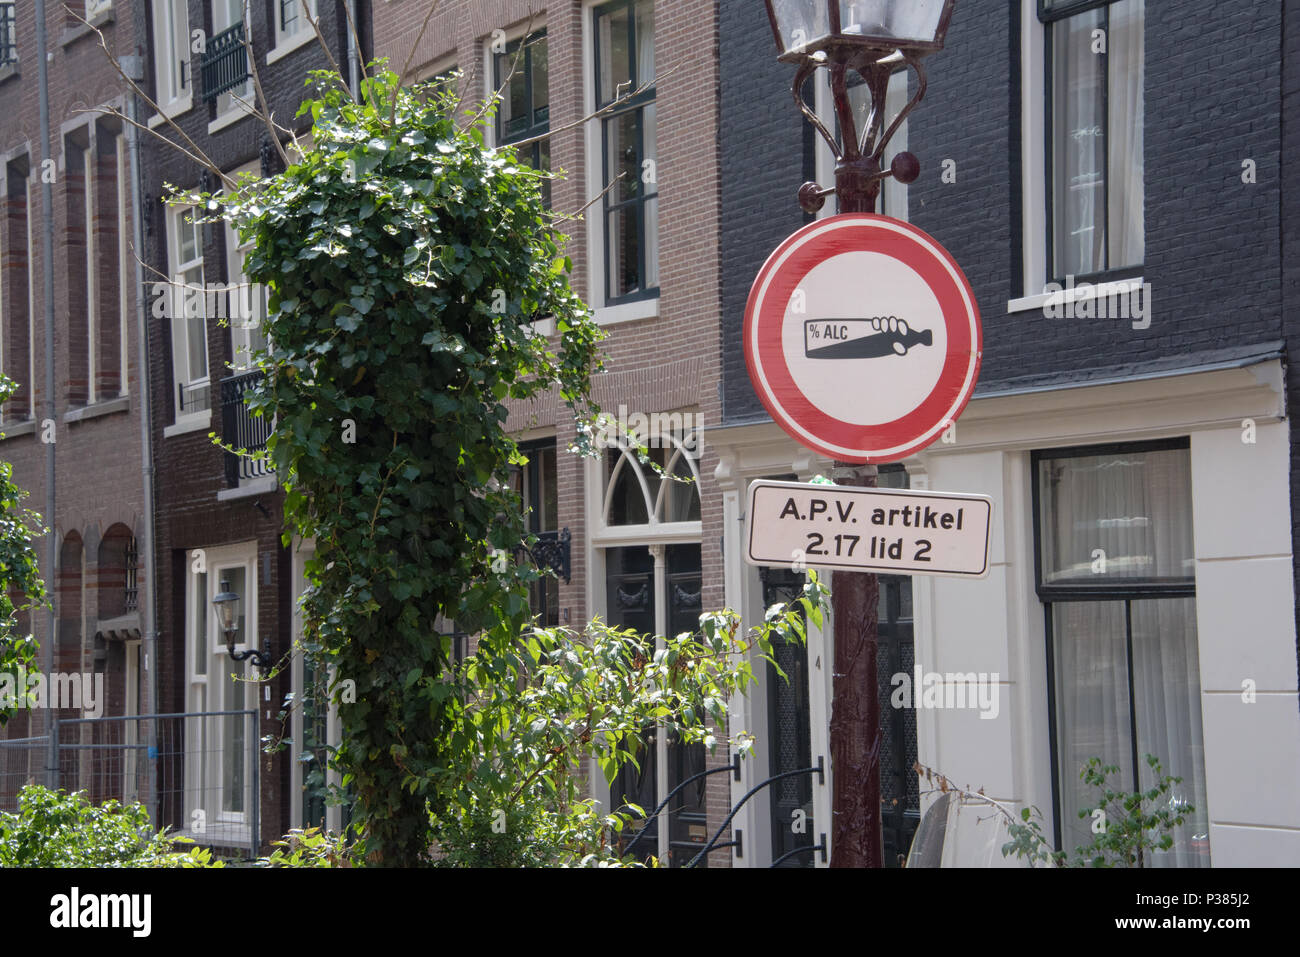 The Dutch are very strict about drinking in the streets as this sign in Amsterdam shows Stock Photo